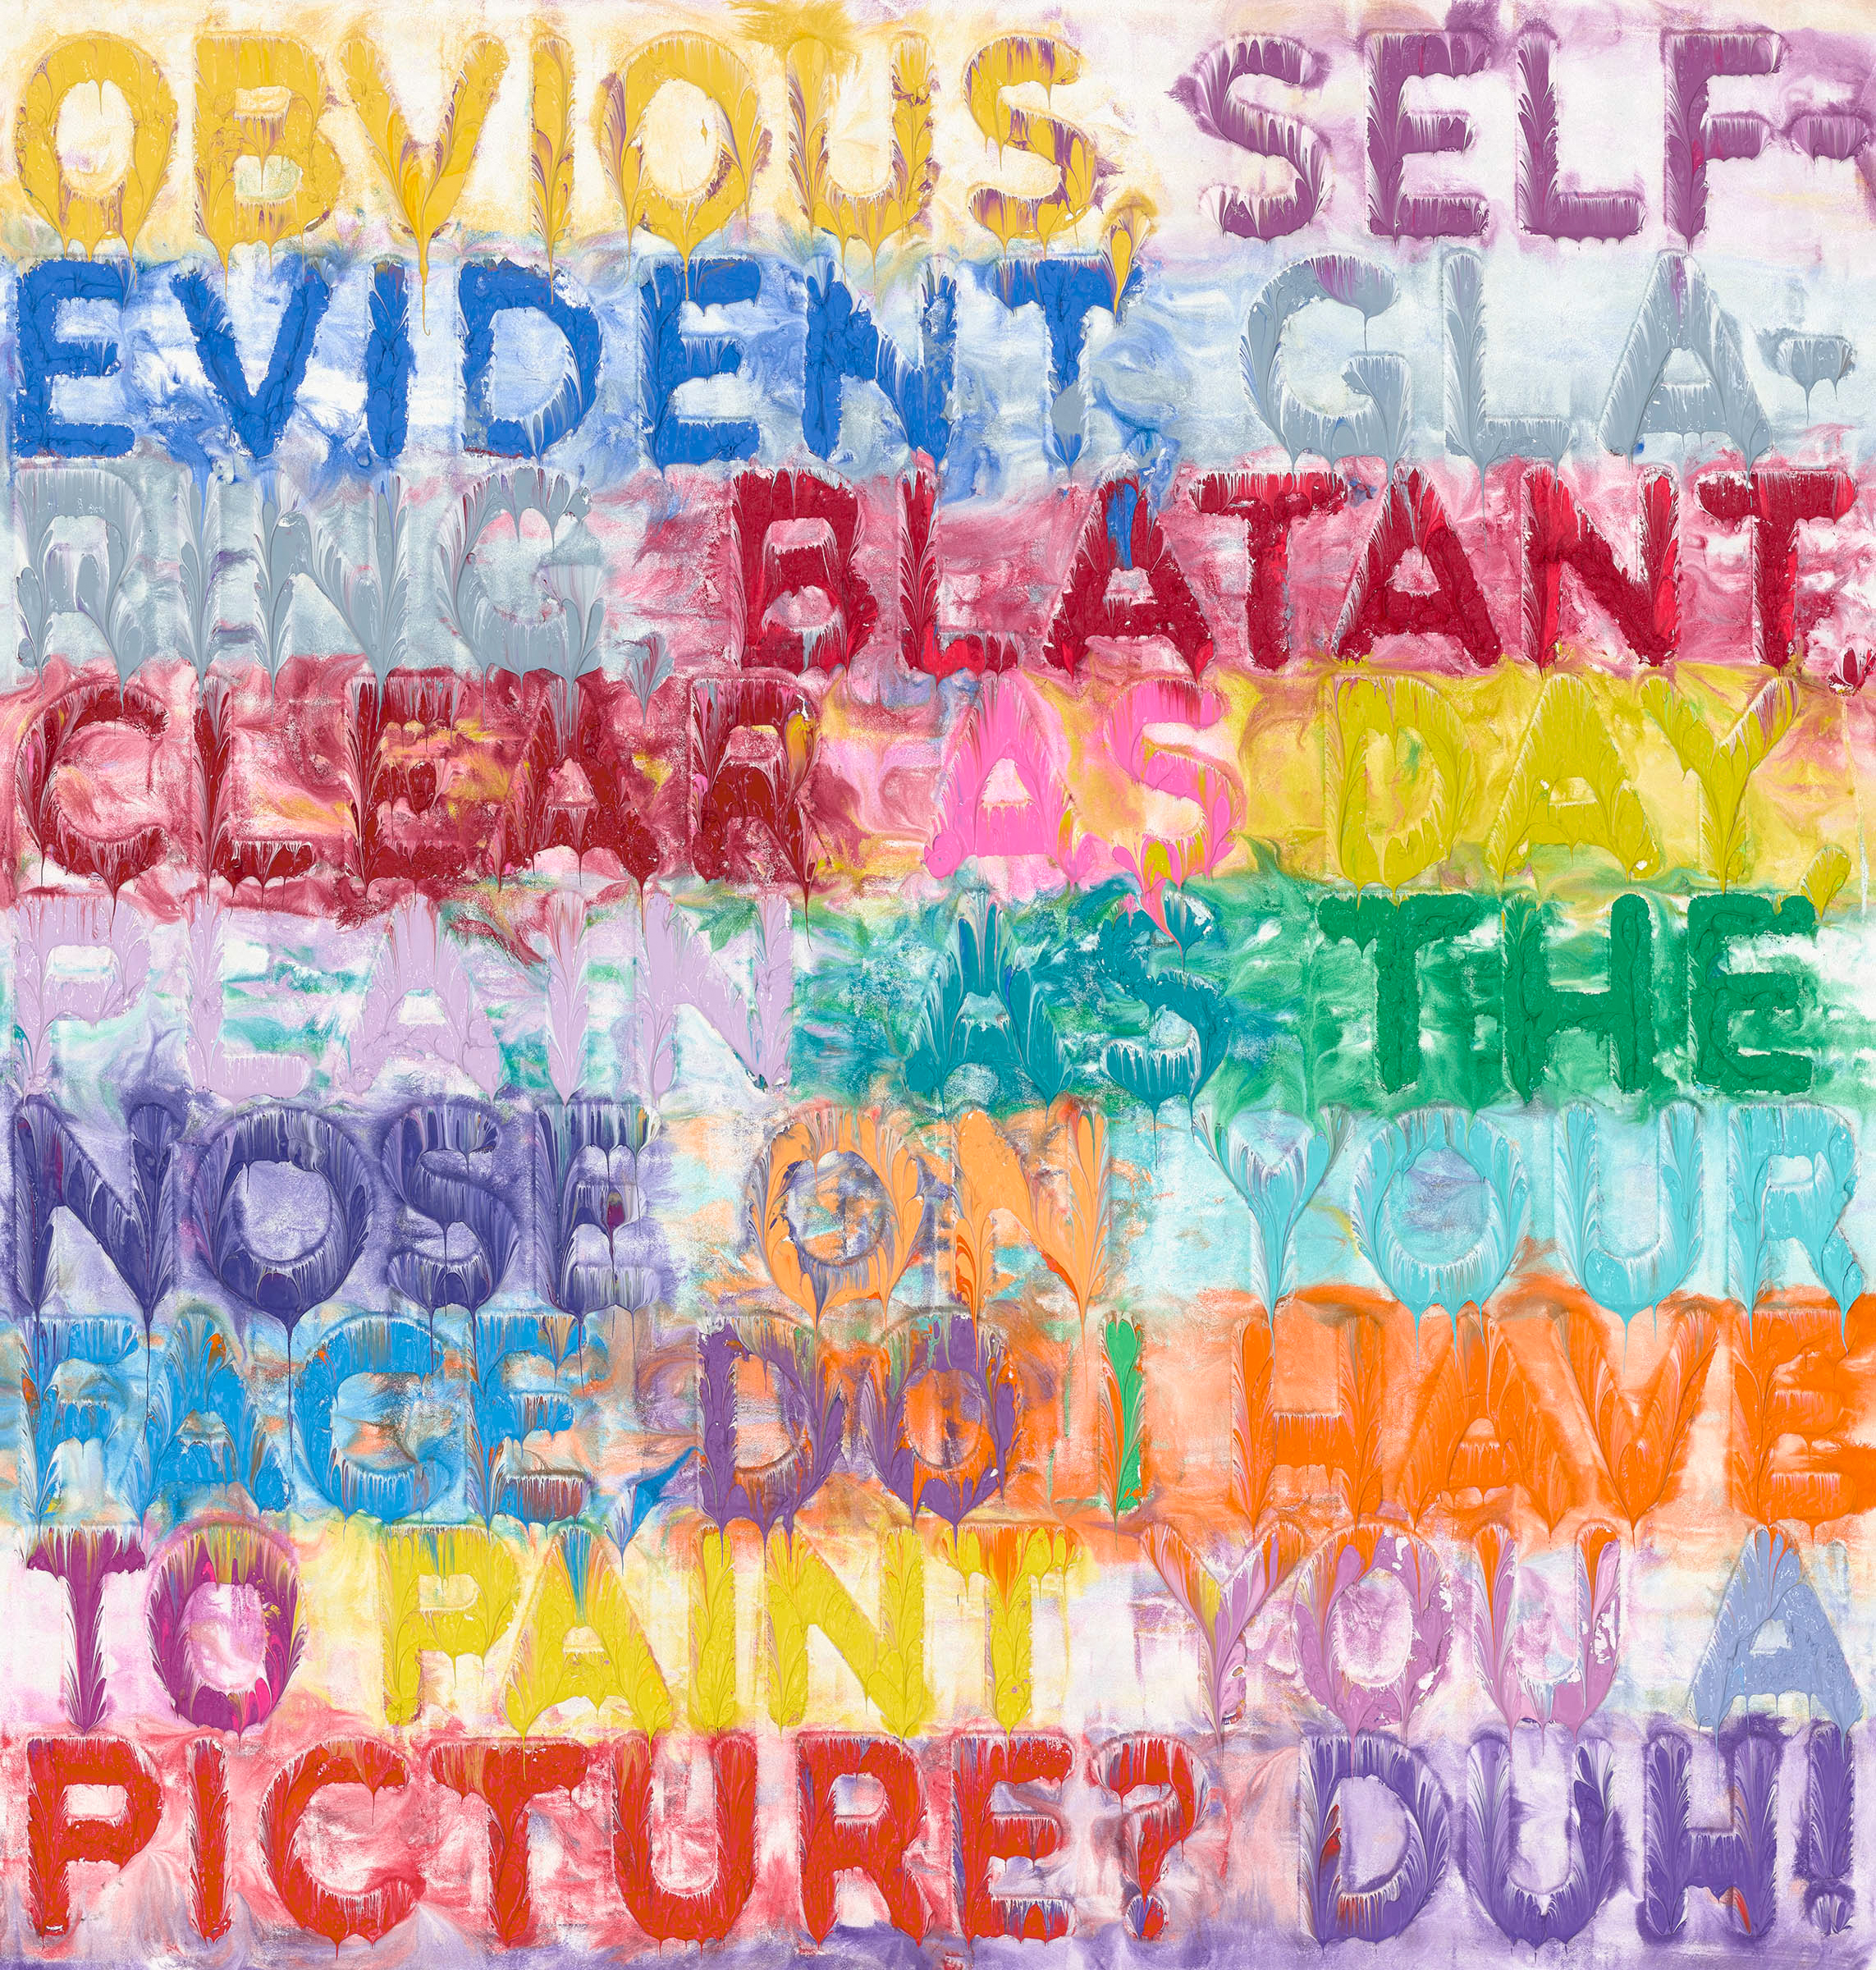 Color image of oil painting with several words and phrases in vary colors